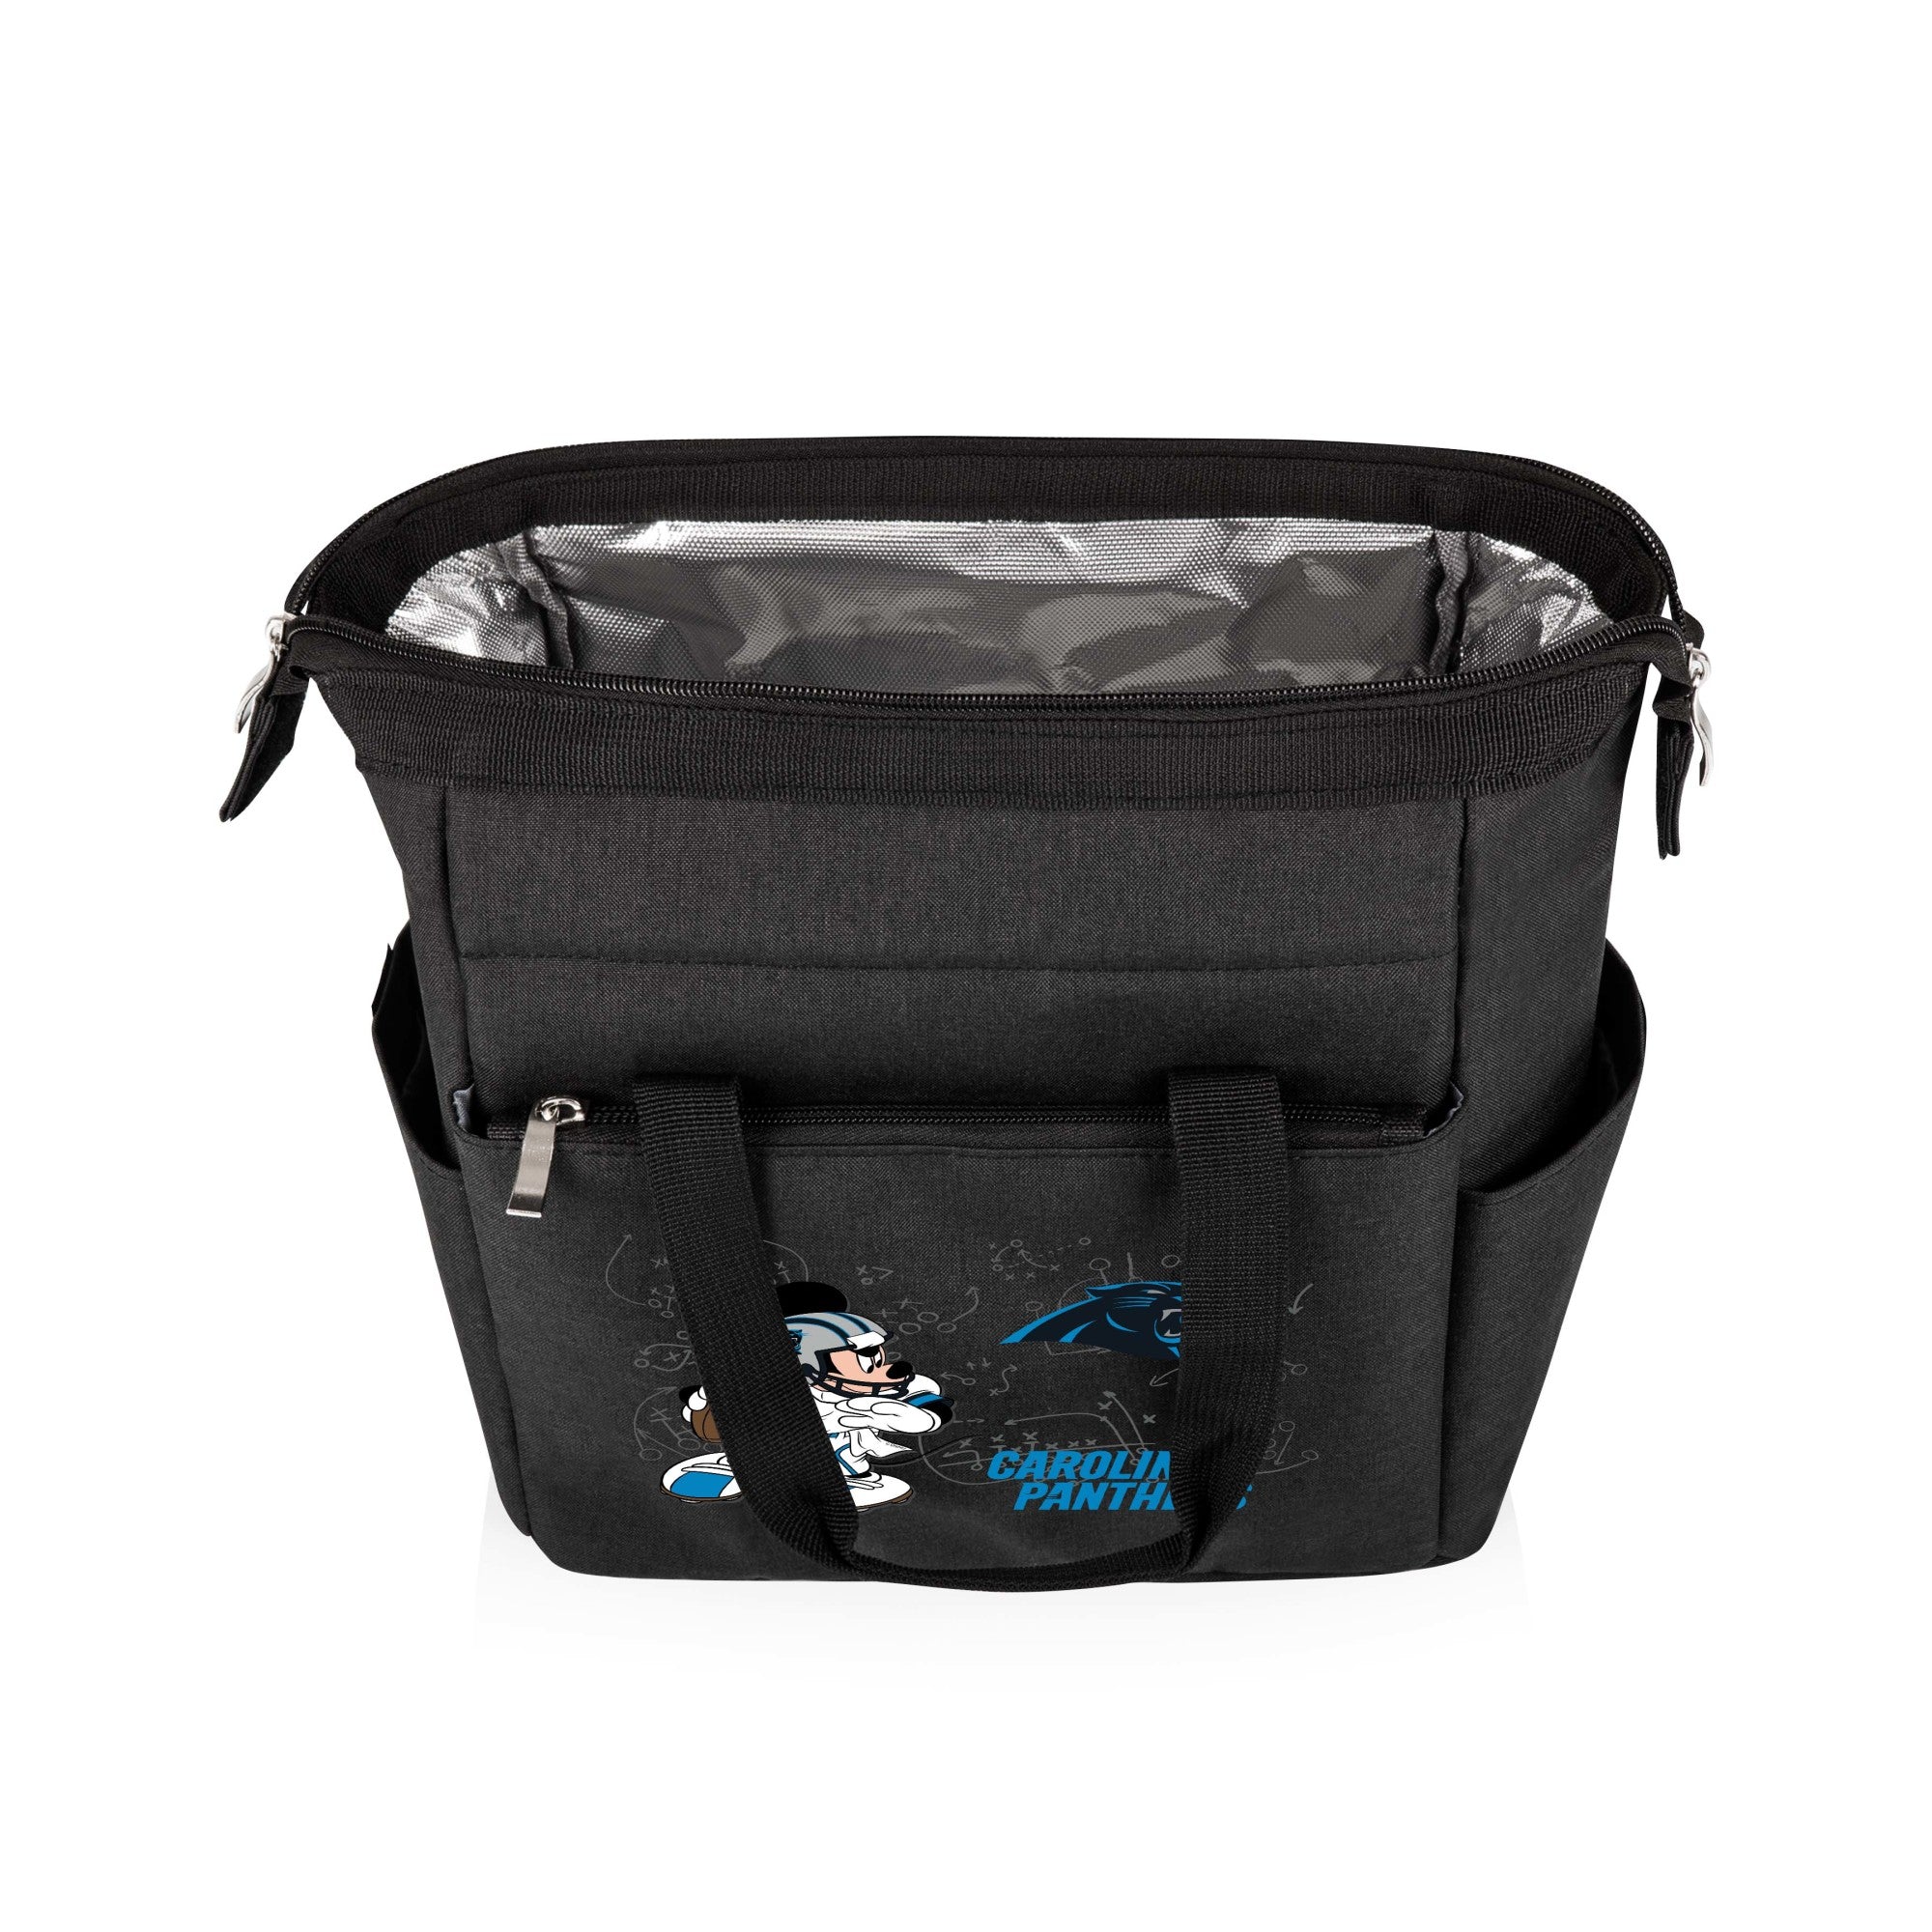 Carolina Panthers Mickey Mouse - On The Go Lunch Bag Cooler